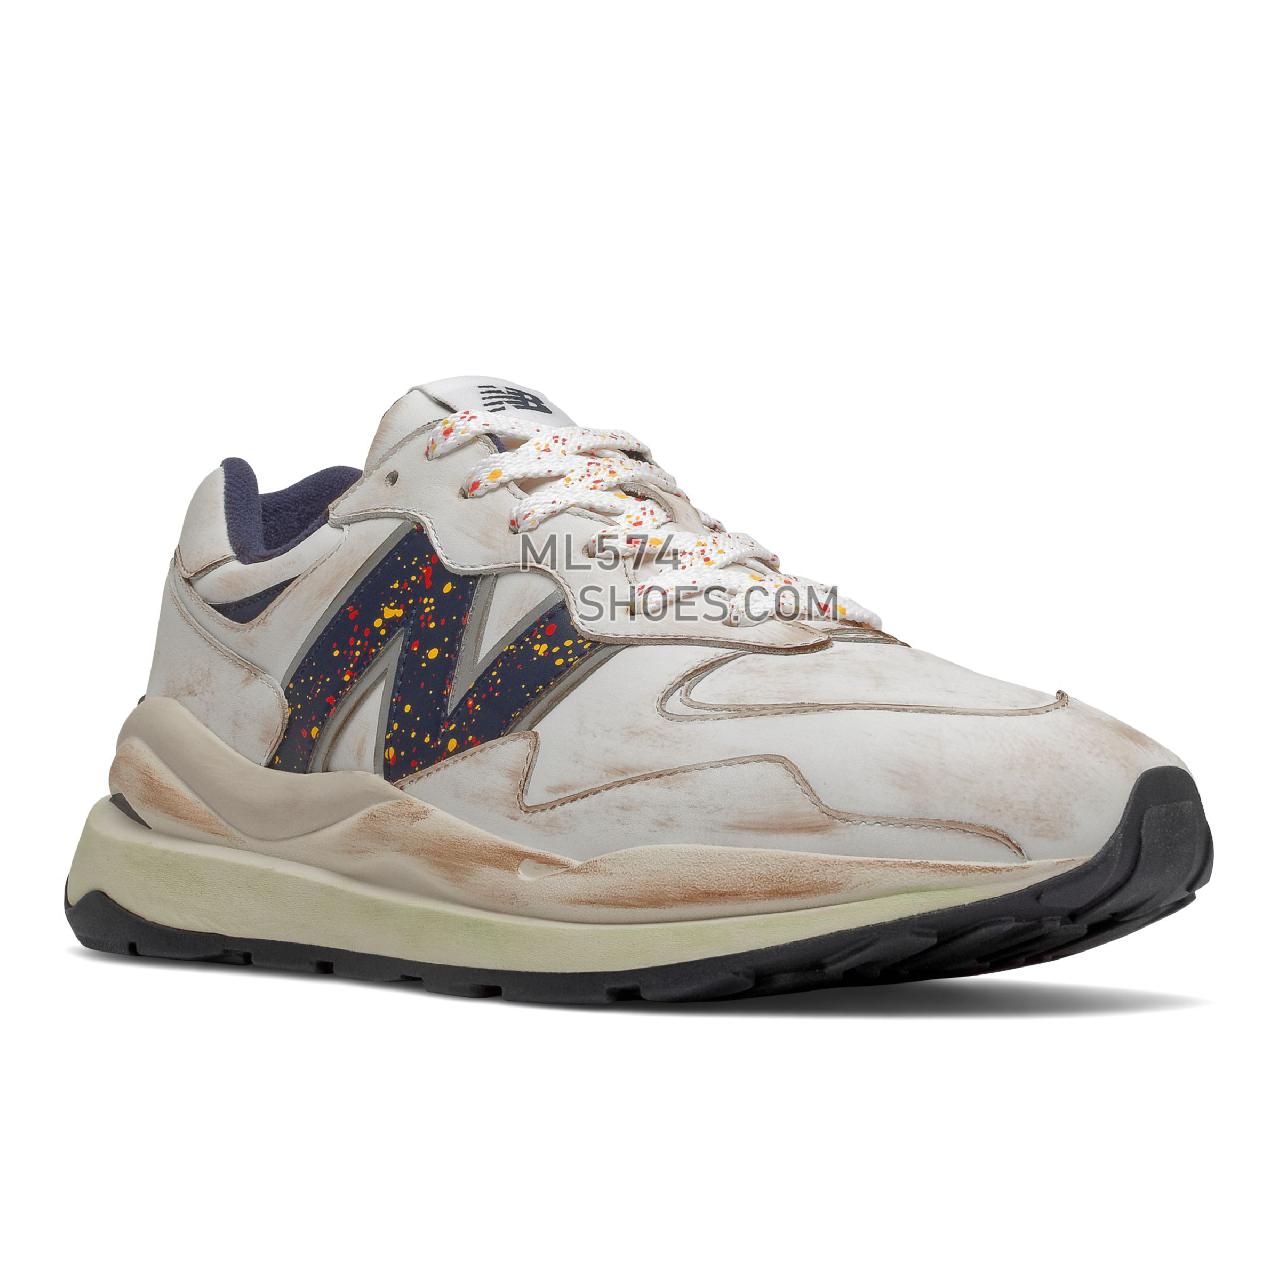 New Balance 57/40 - Men's Sport Style Sneakers - White with Natural Indigo - M5740FD1